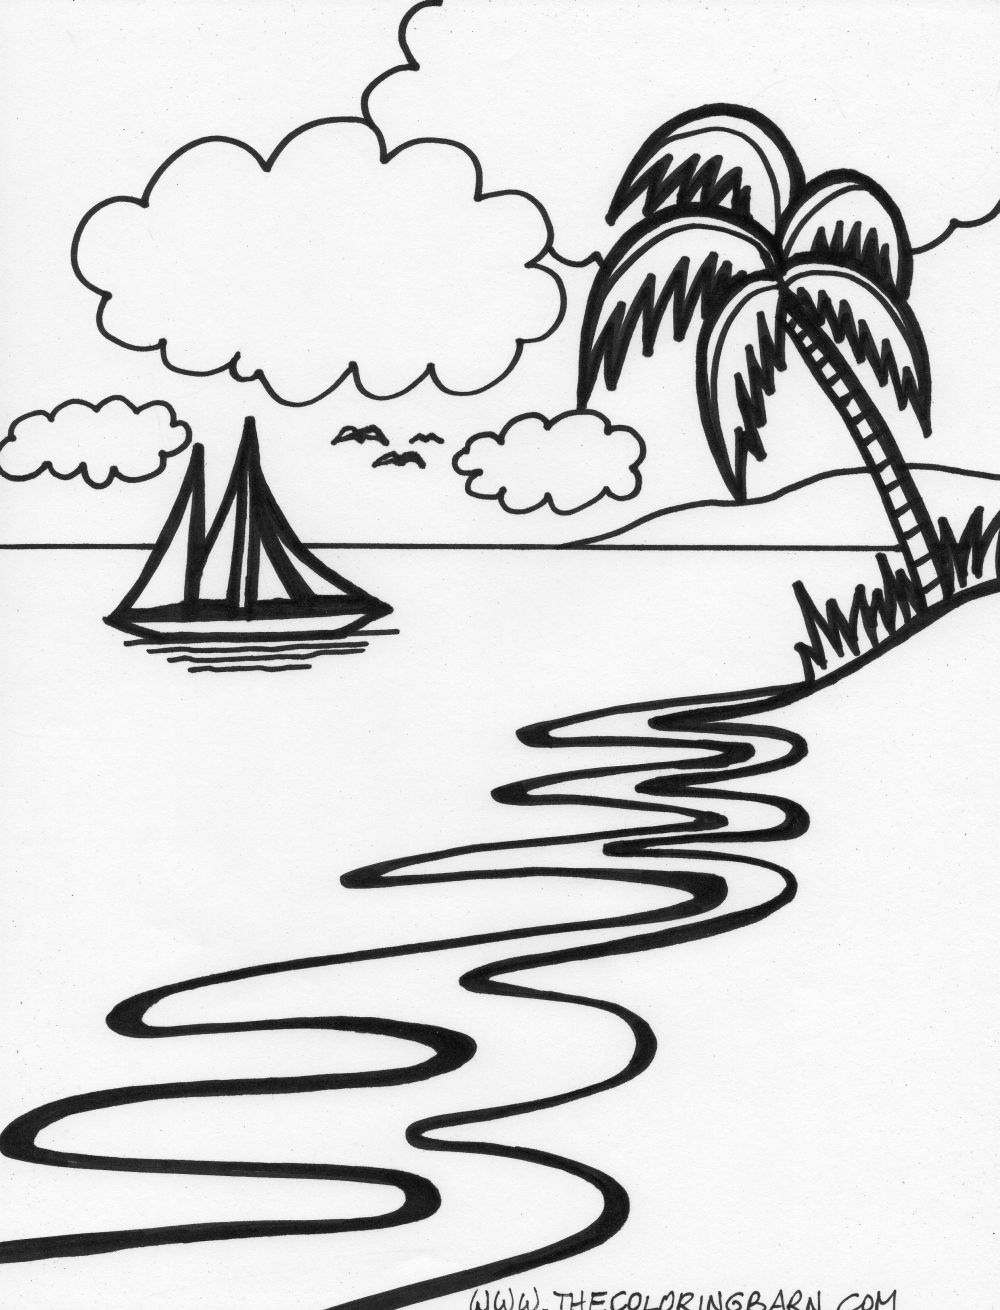 10 Pics of Tropical Sunset Coloring Pages - Tropical Beach ...